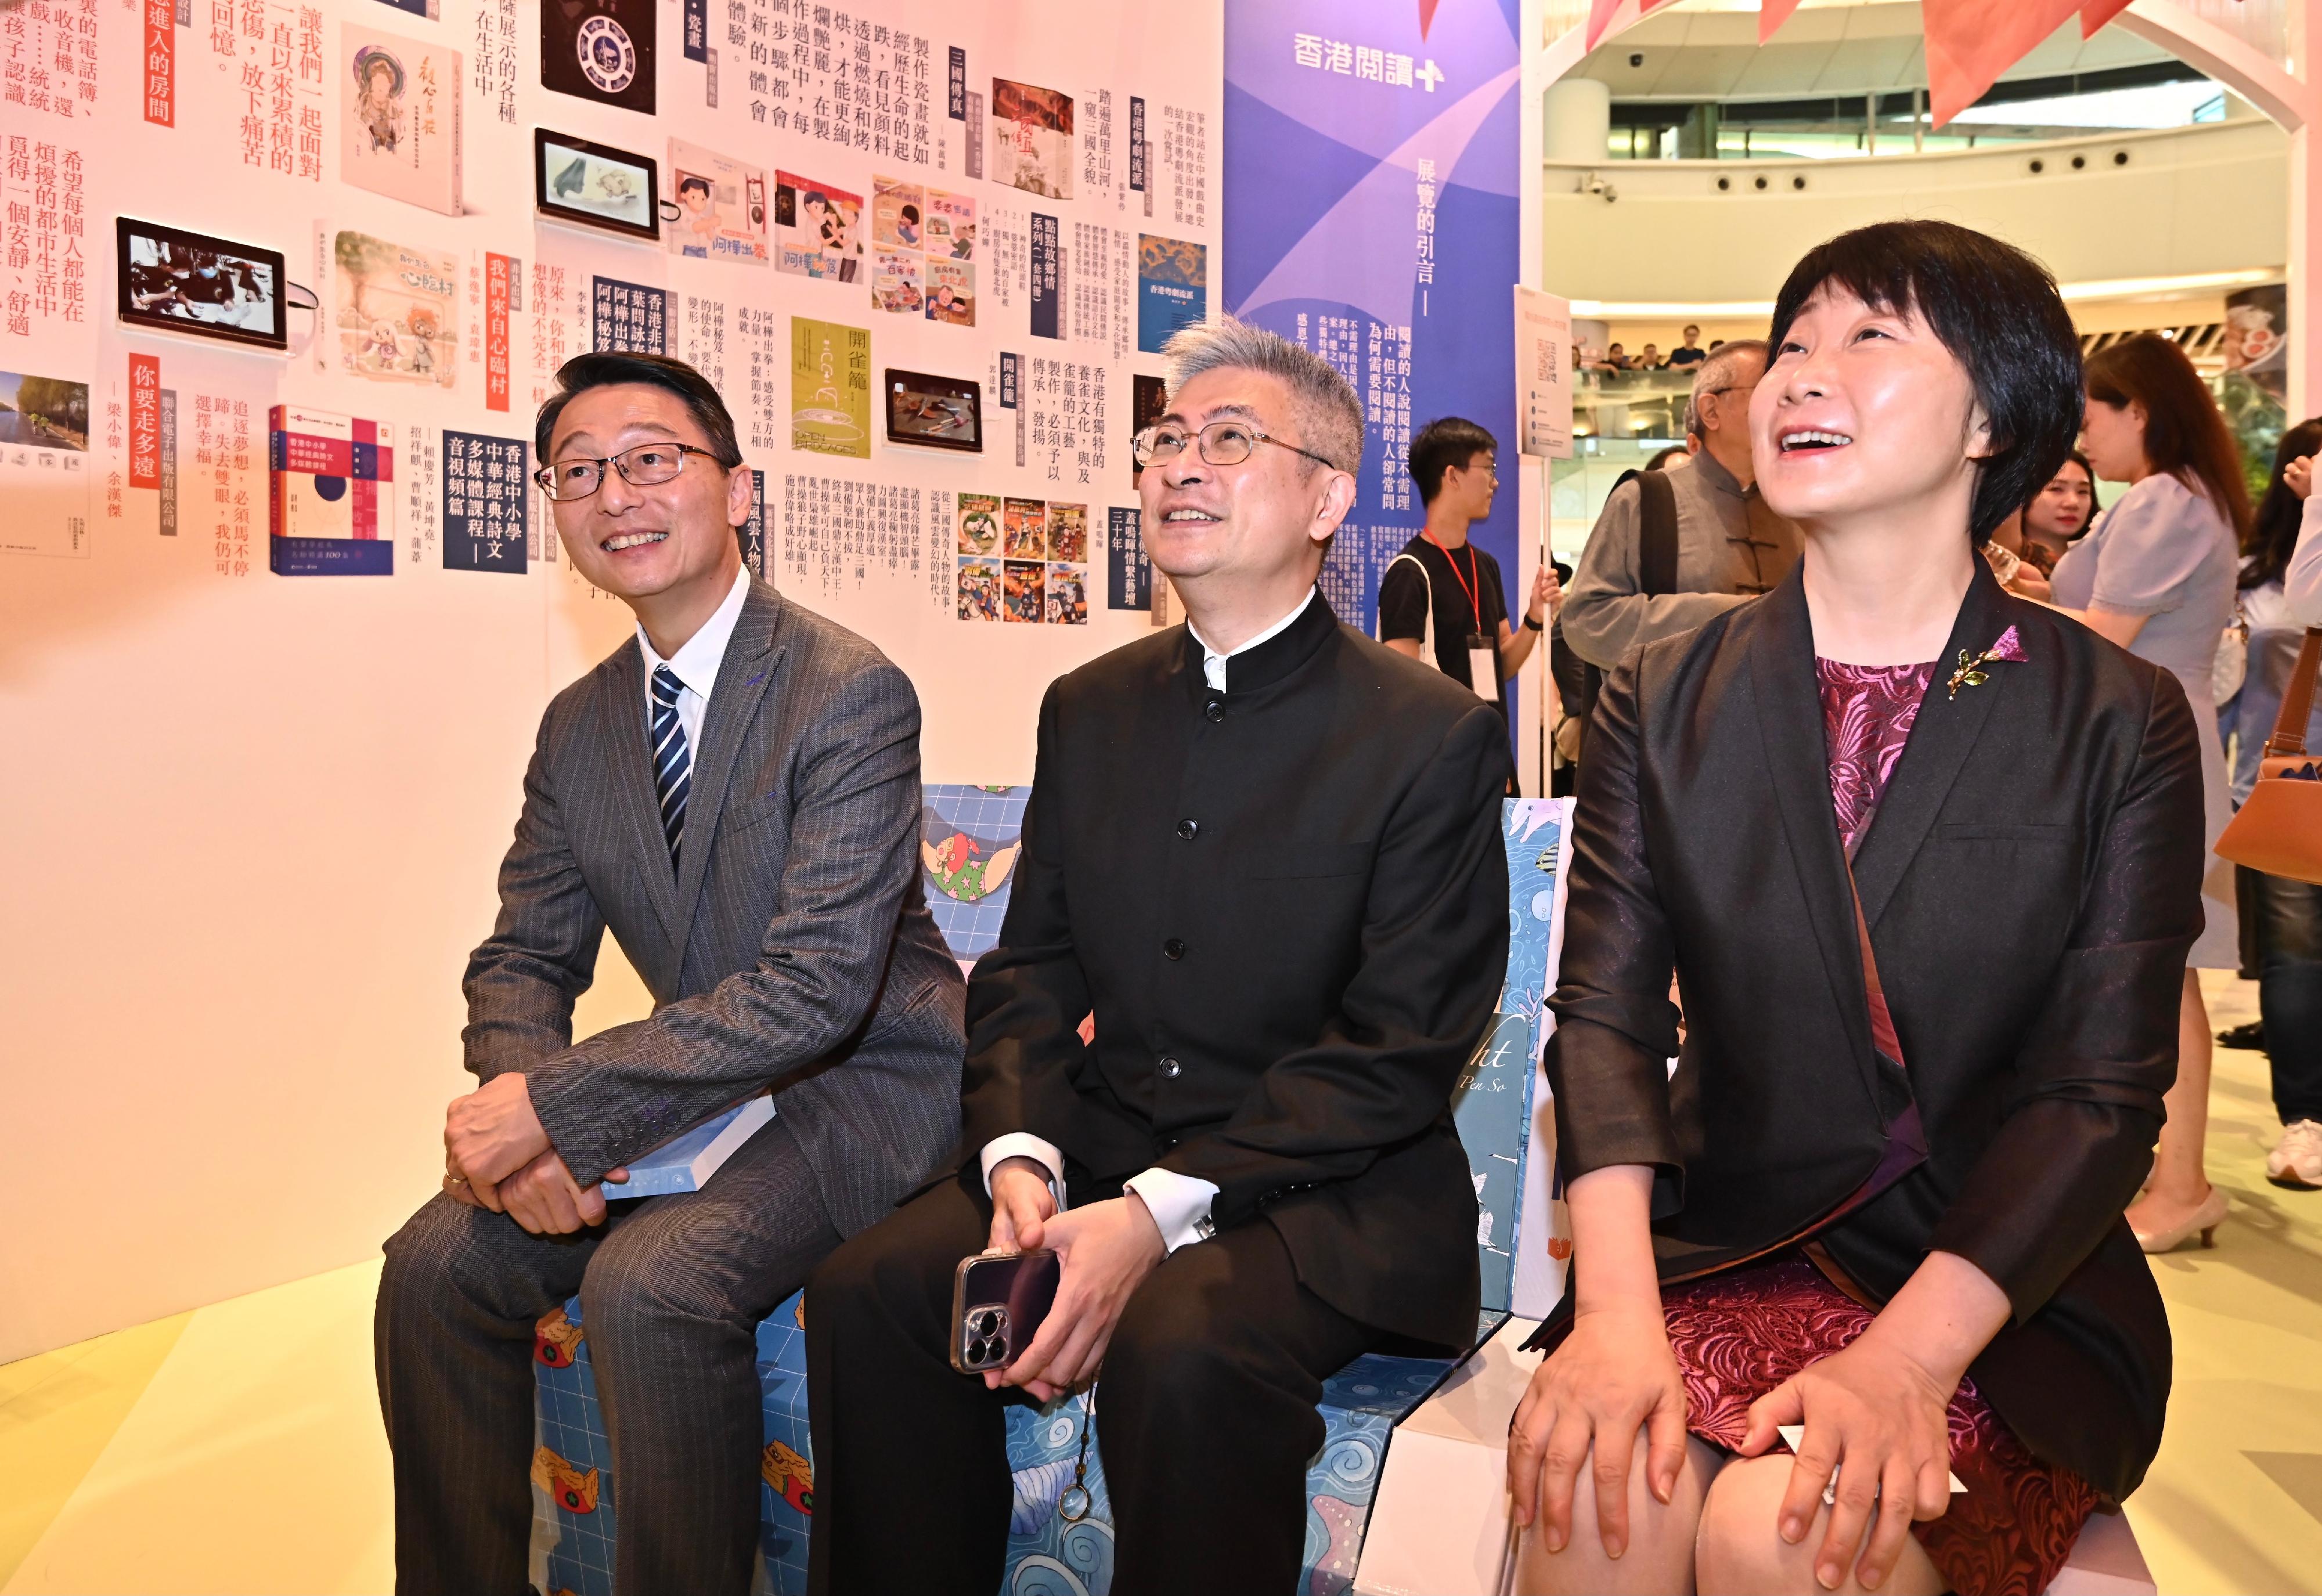 The Hong Kong Public Libraries of the Leisure and Cultural Services Department and the Hong Kong Publishing Federation today (April 20) jointly held the opening ceremony of Hong Kong Reading Week and the 2024 Hong Kong Reading+ at New Town Plaza in Sha Tin. Photo shows officiating guests including the Acting Secretary for Culture, Sports and Tourism, Mr Raistlin Lau (centre); member of the Standing Committee and the Head of the Publicity Department of CPC Shenzhen Municipal Committee, Ms Zhang Ling (right); the Director of Leisure and Cultural Services, Mr Vincent Liu (left) visiting the exhibition at the 2024 Hong Kong Reading+ carnival.
